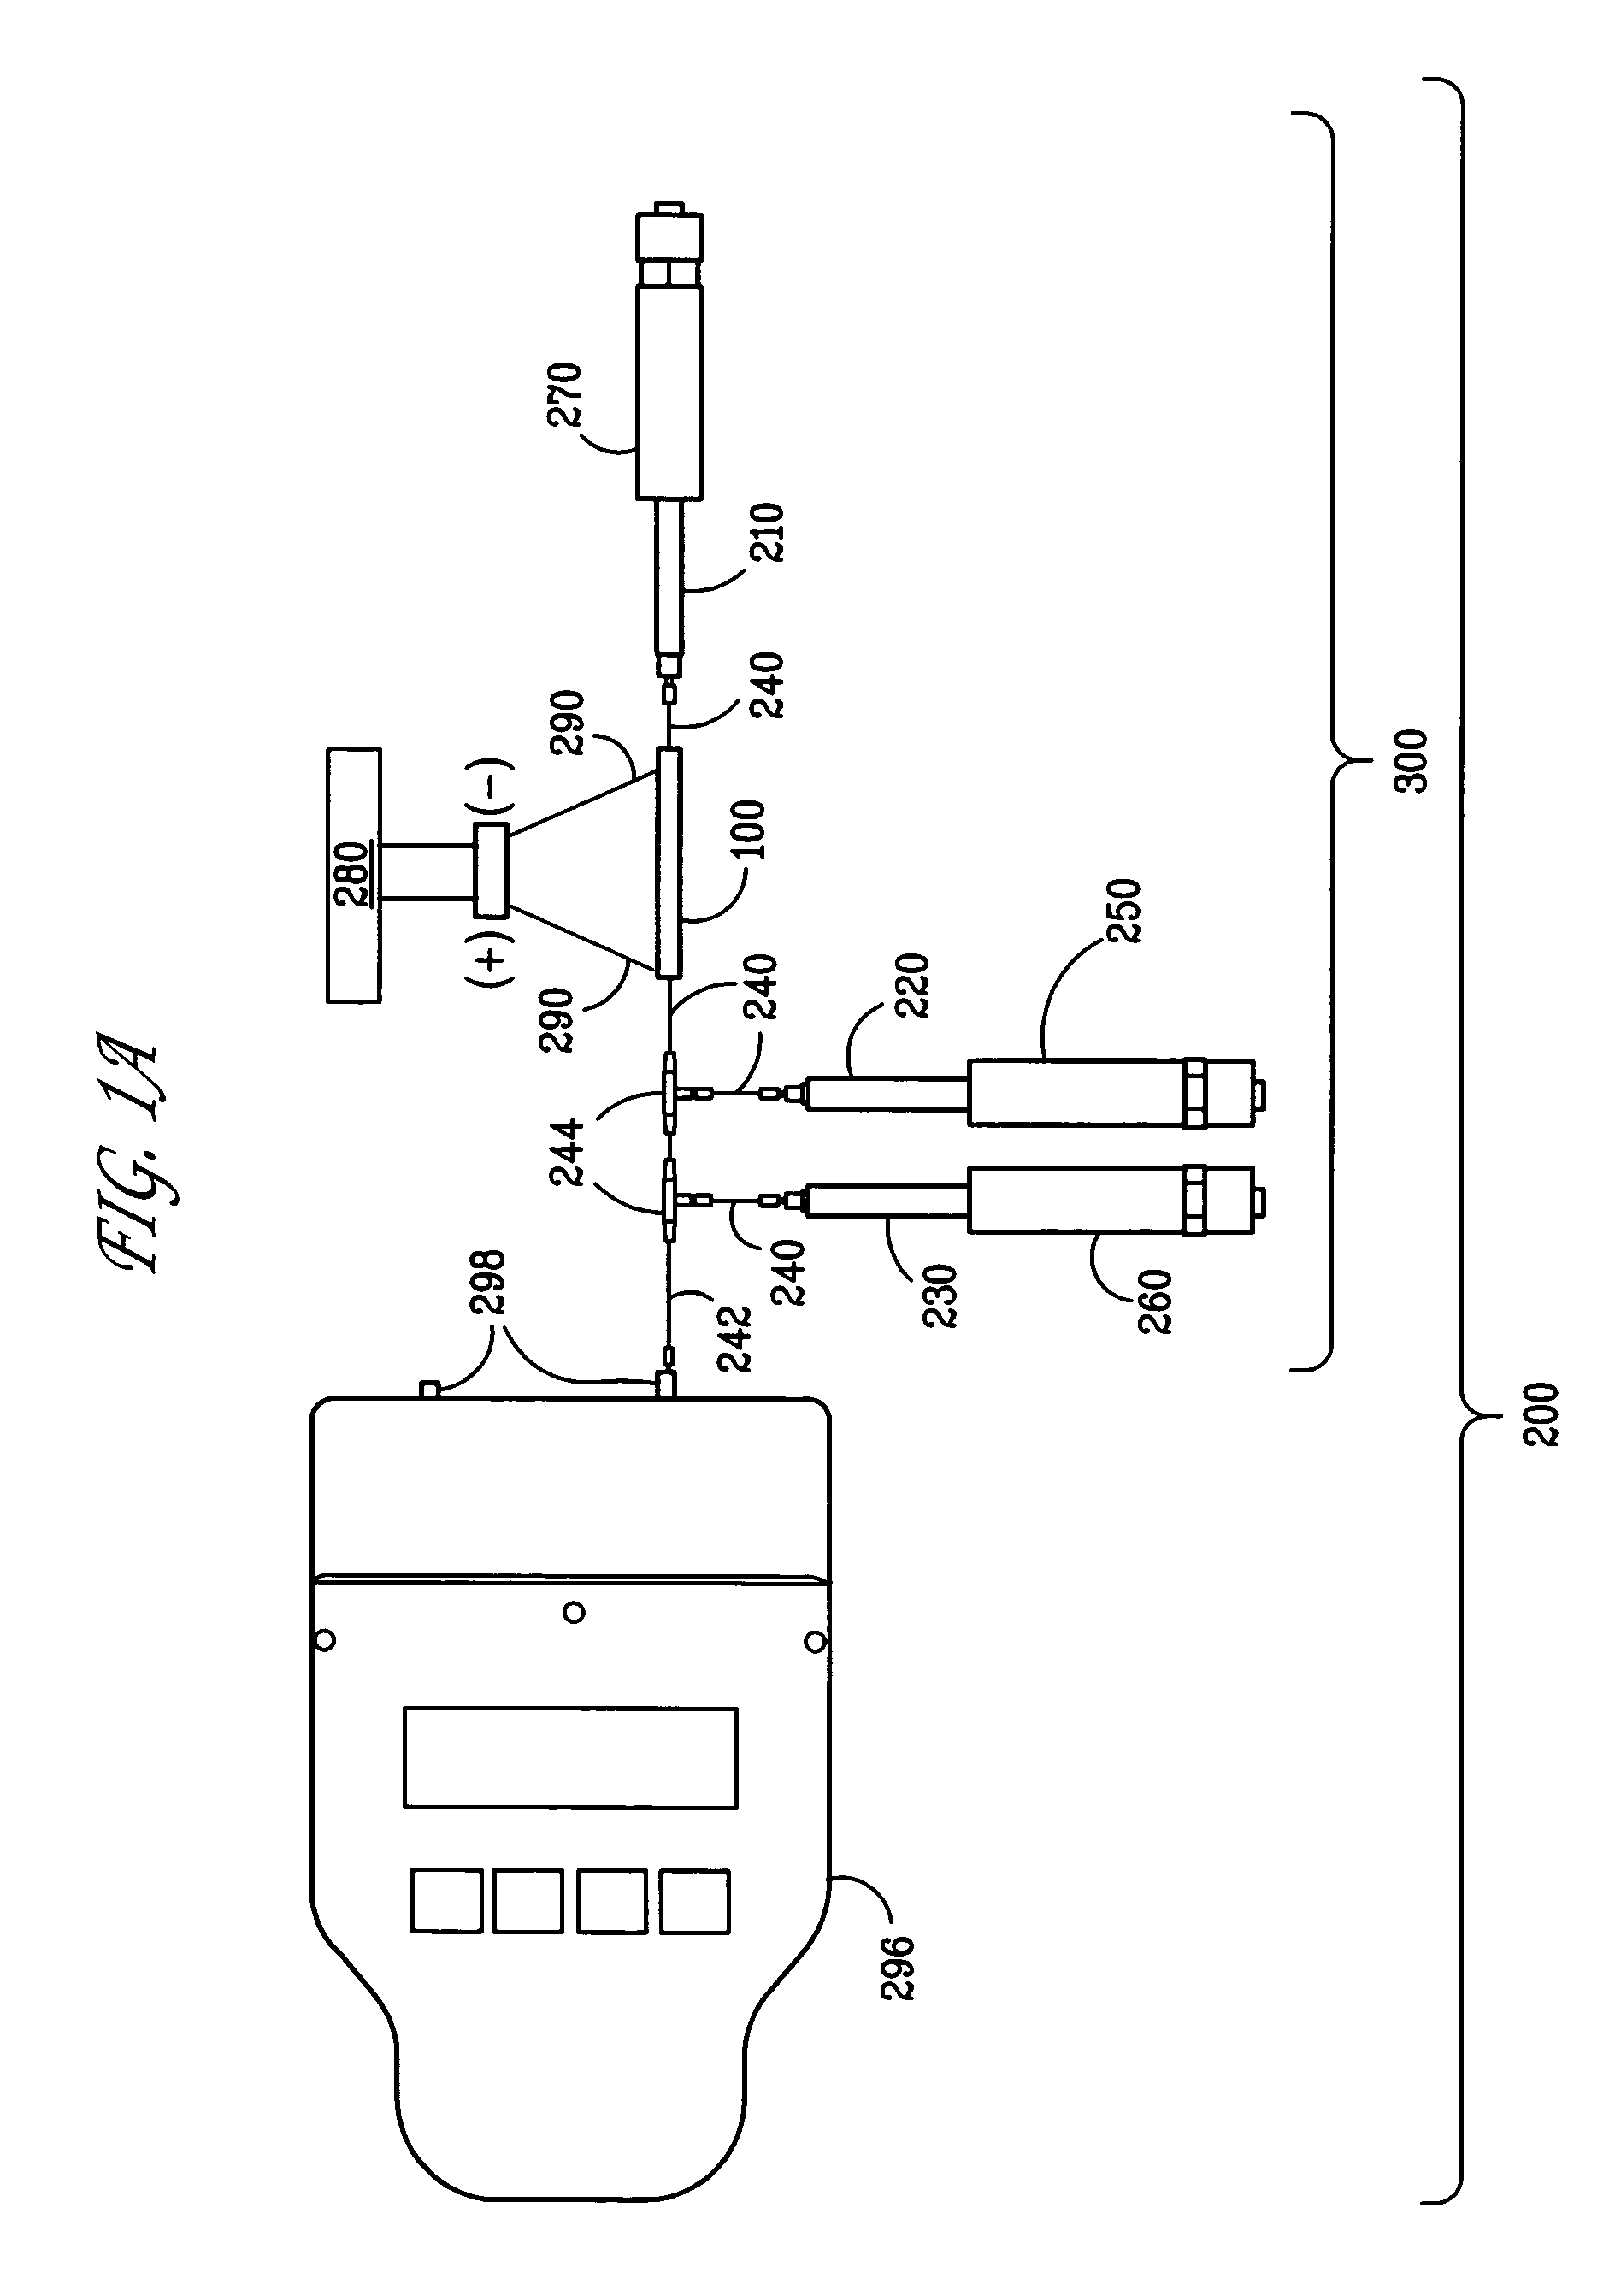 High temperature flow-through device for rapid solubilization and analysis